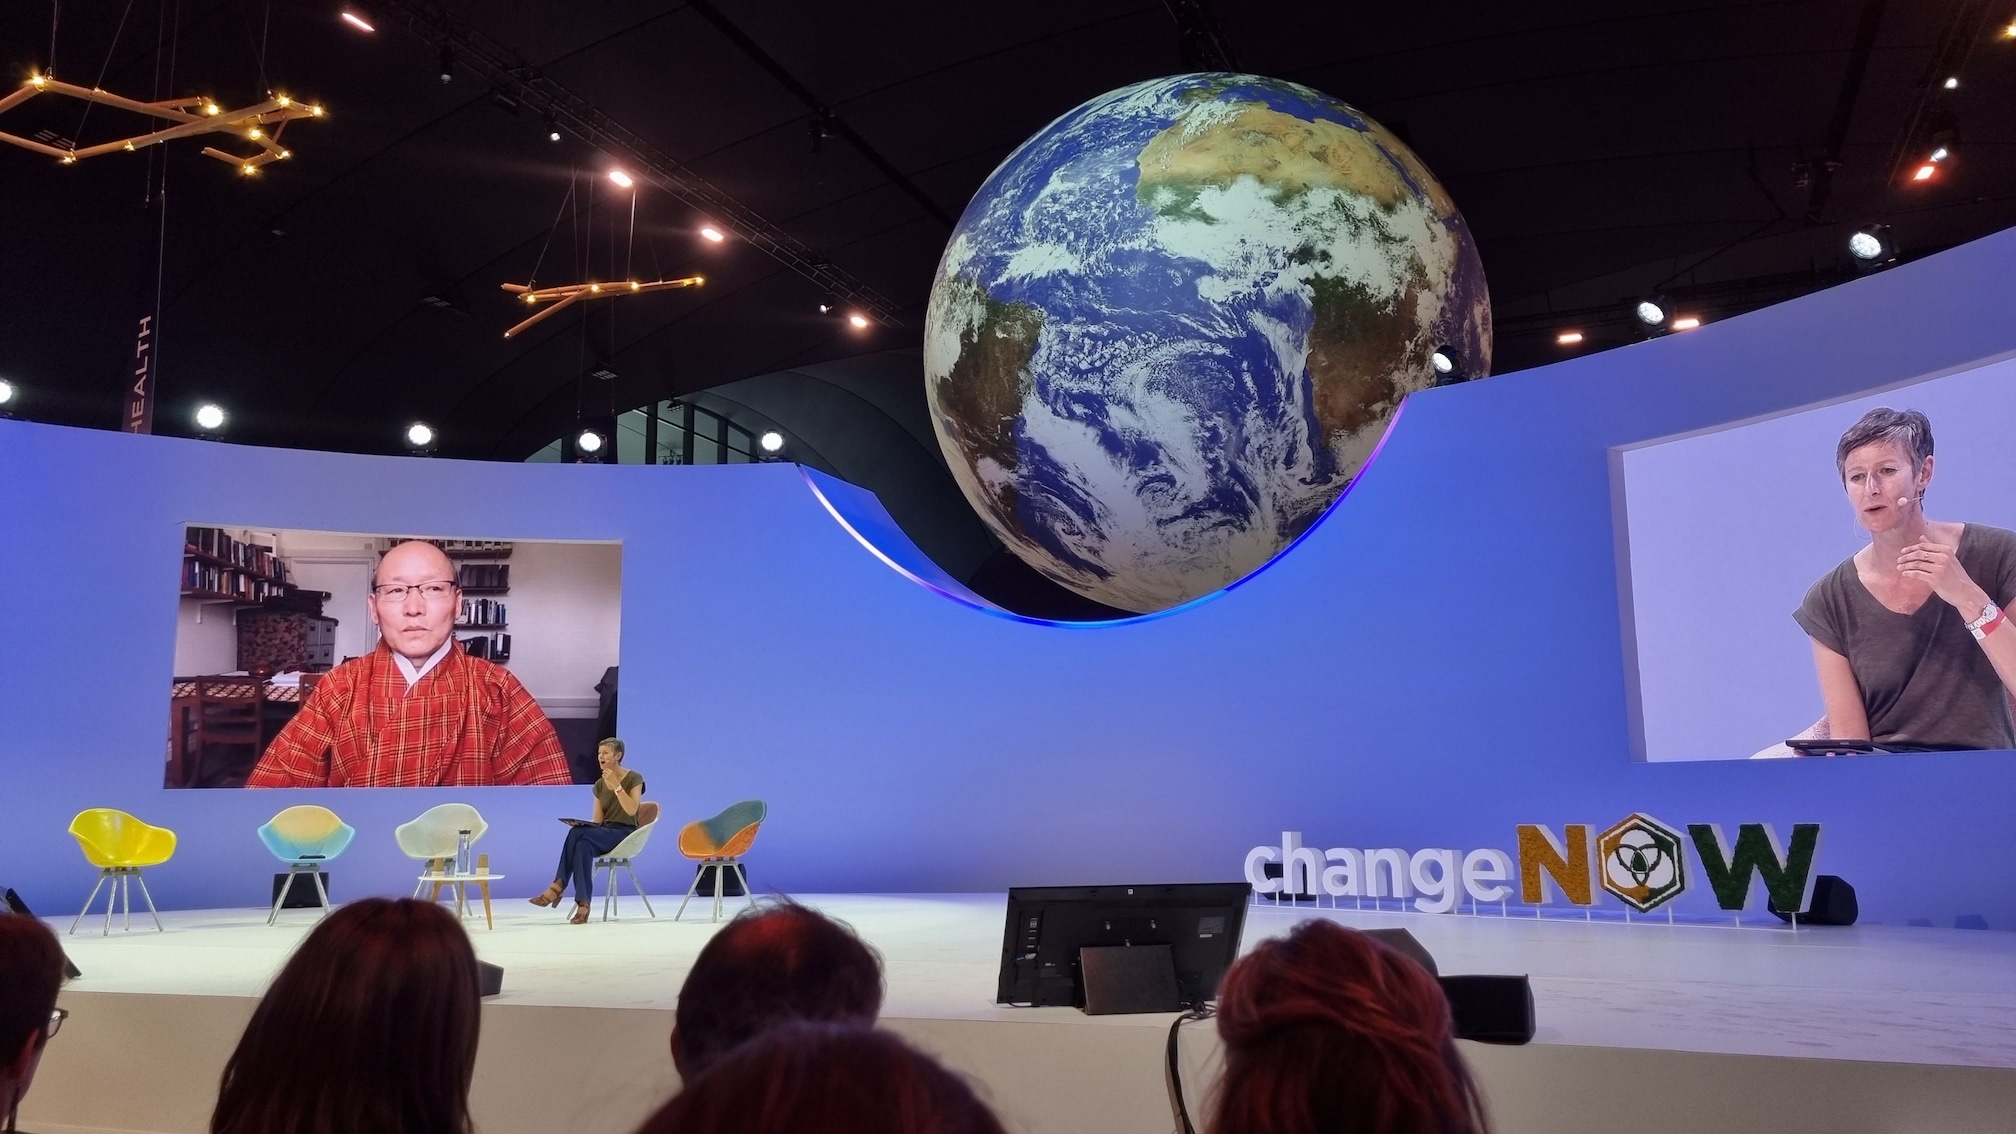 A Message from the Change Now Summit 2022